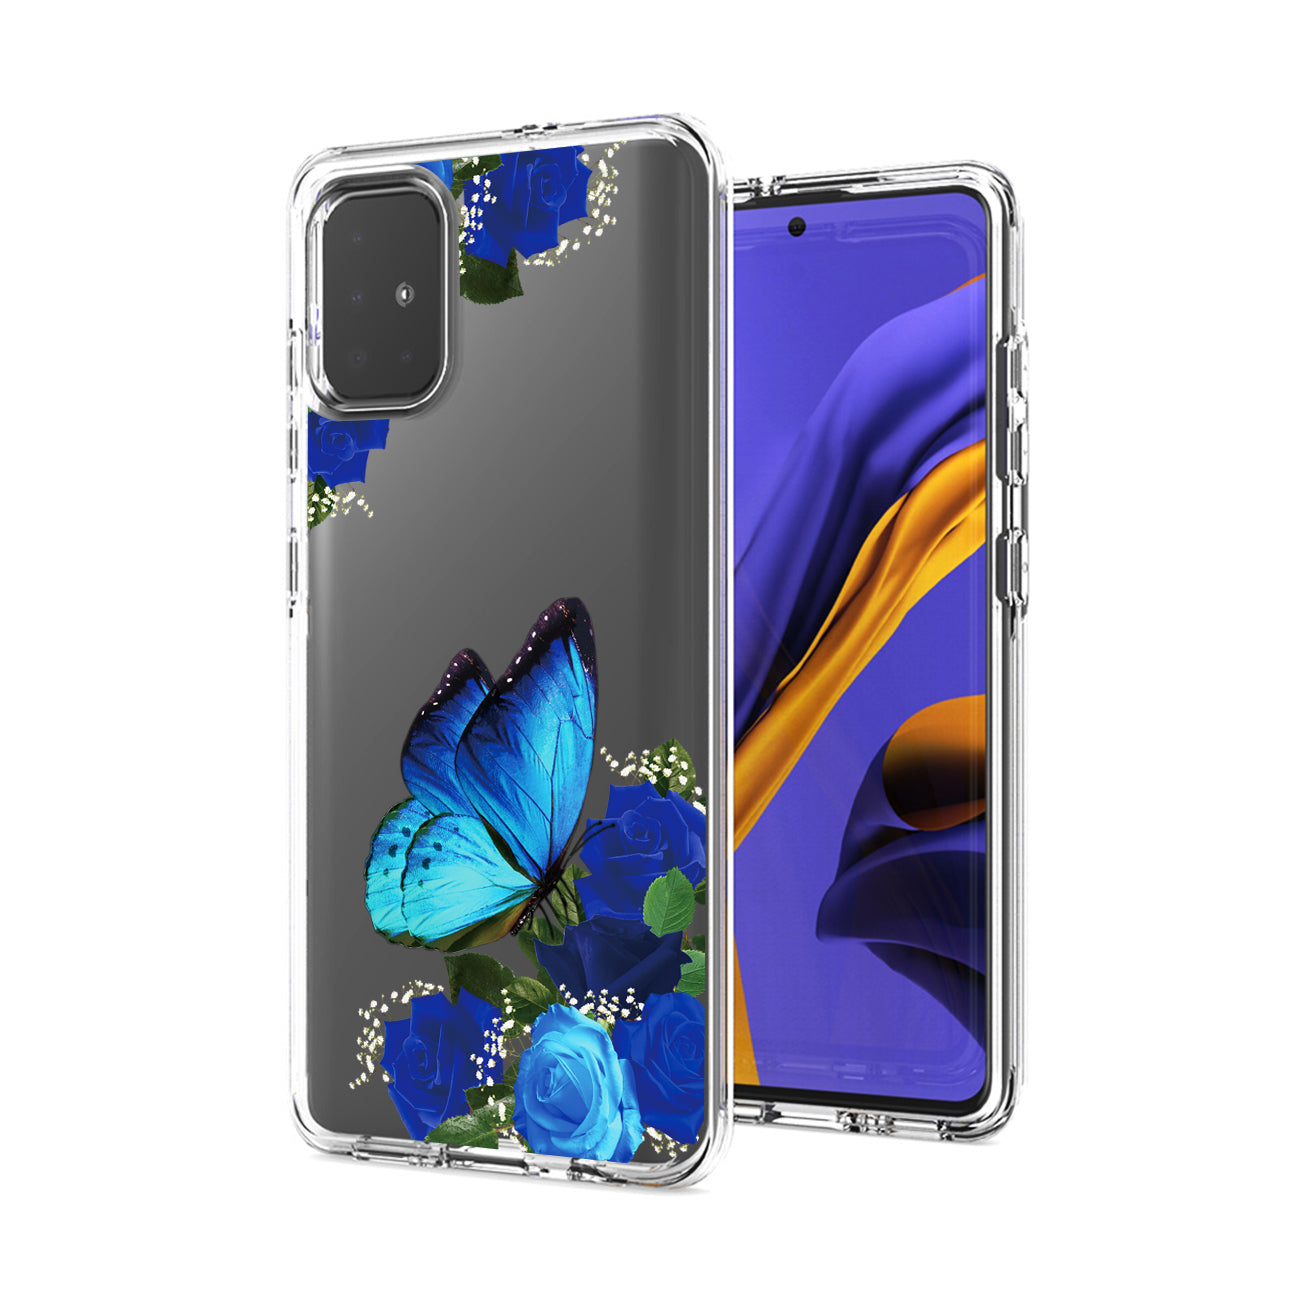 Pressed dried flower Design Phone case for SAMSUNG GALAXY A51 5G In Blue